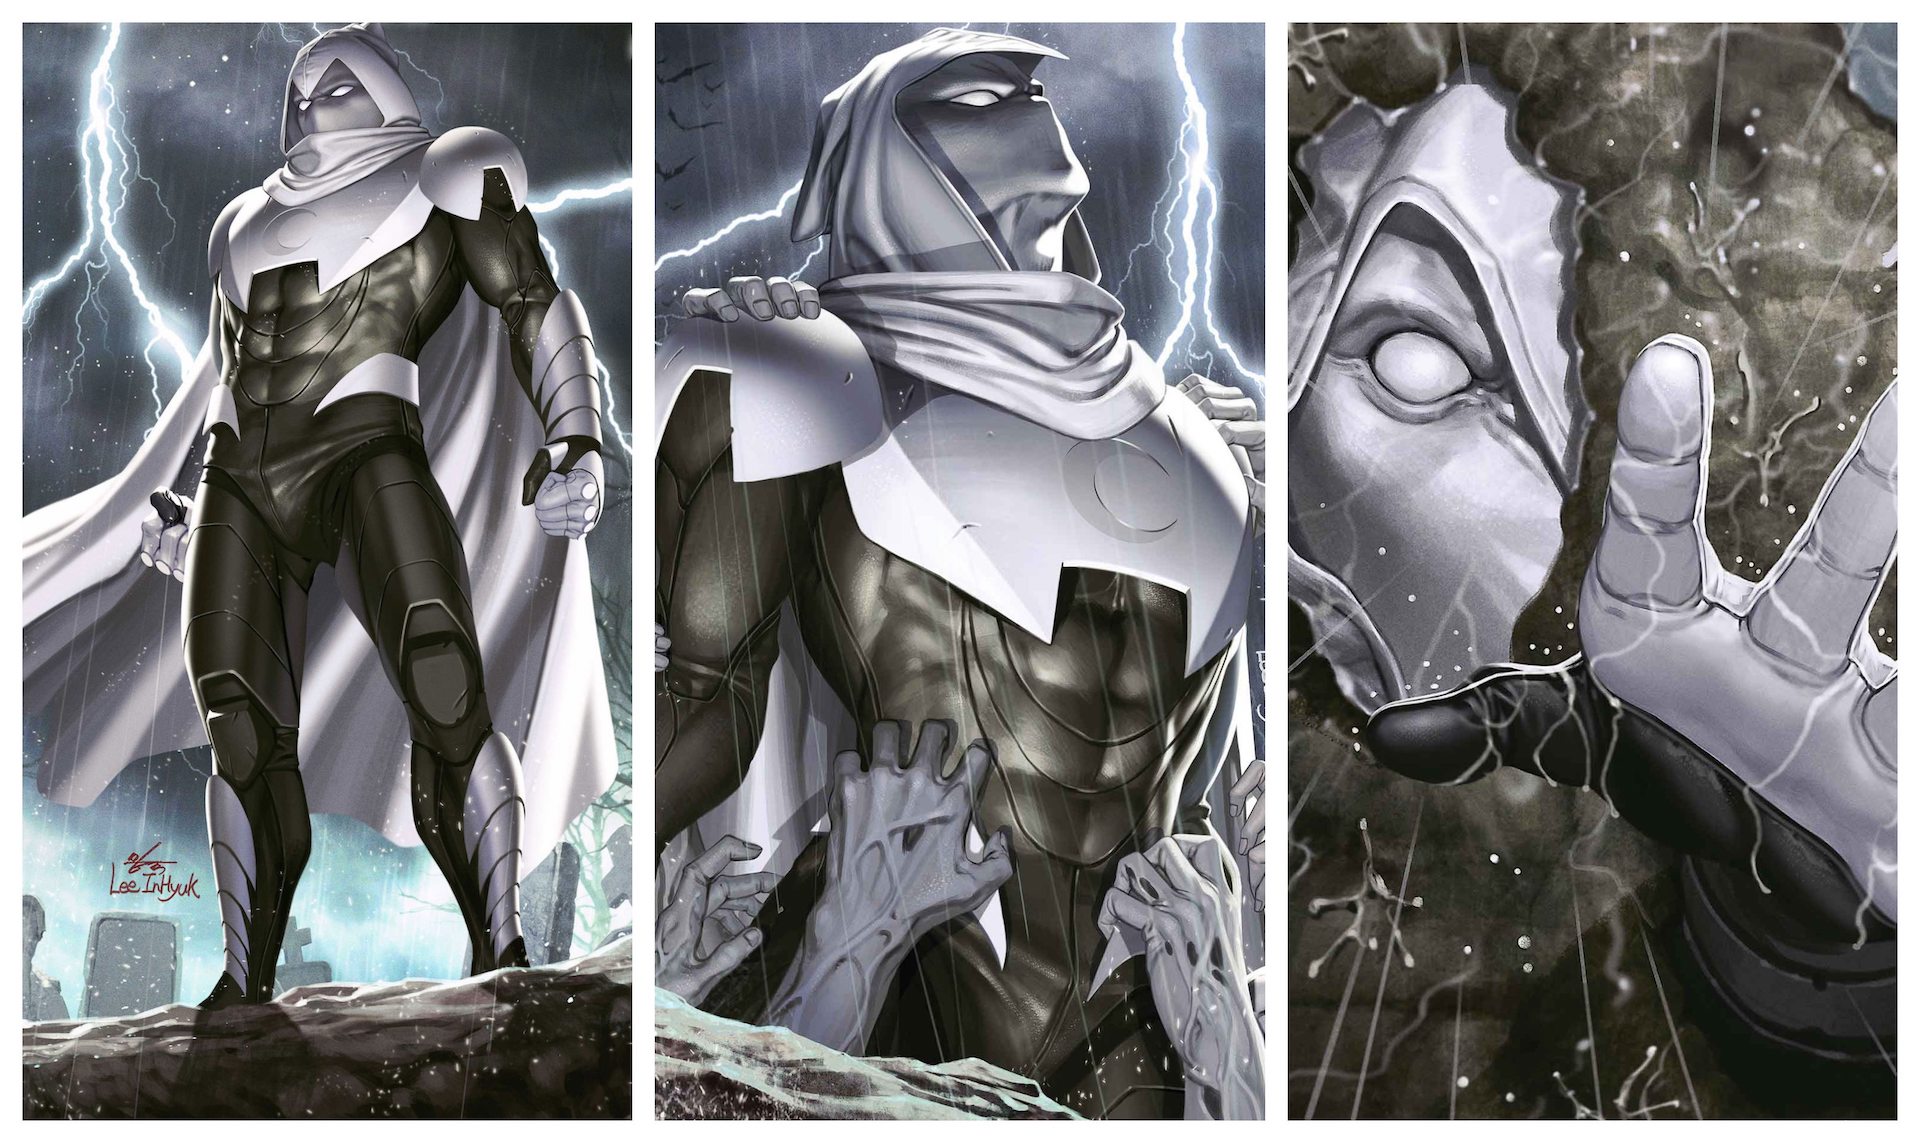 Empire's World-Exclusive Moon Knight Covers Revealed